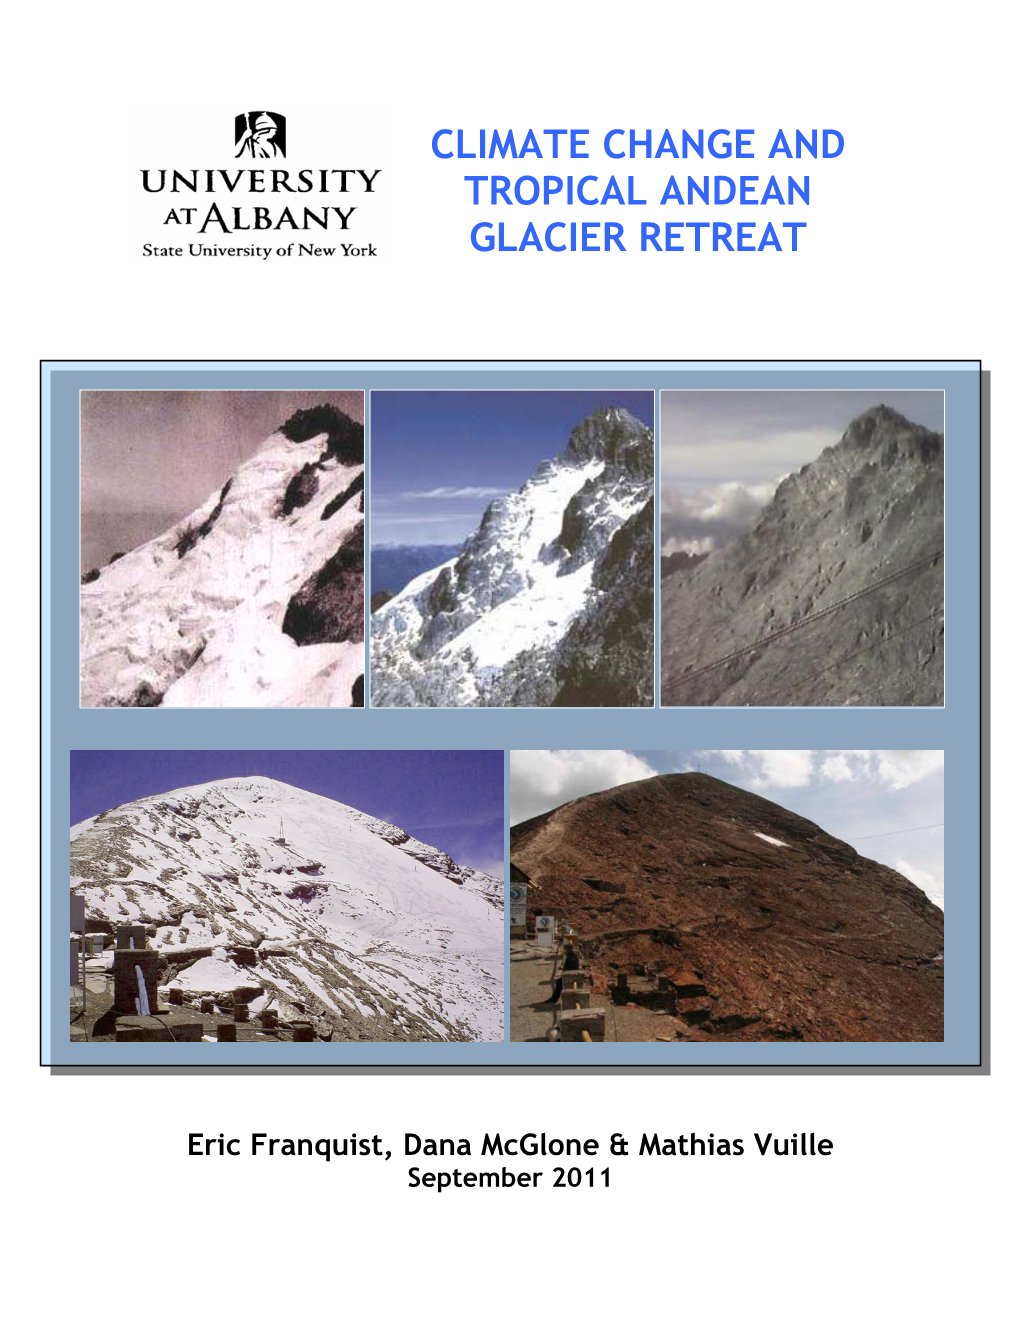 Climate Change and Tropical Andean Glacier Retreat